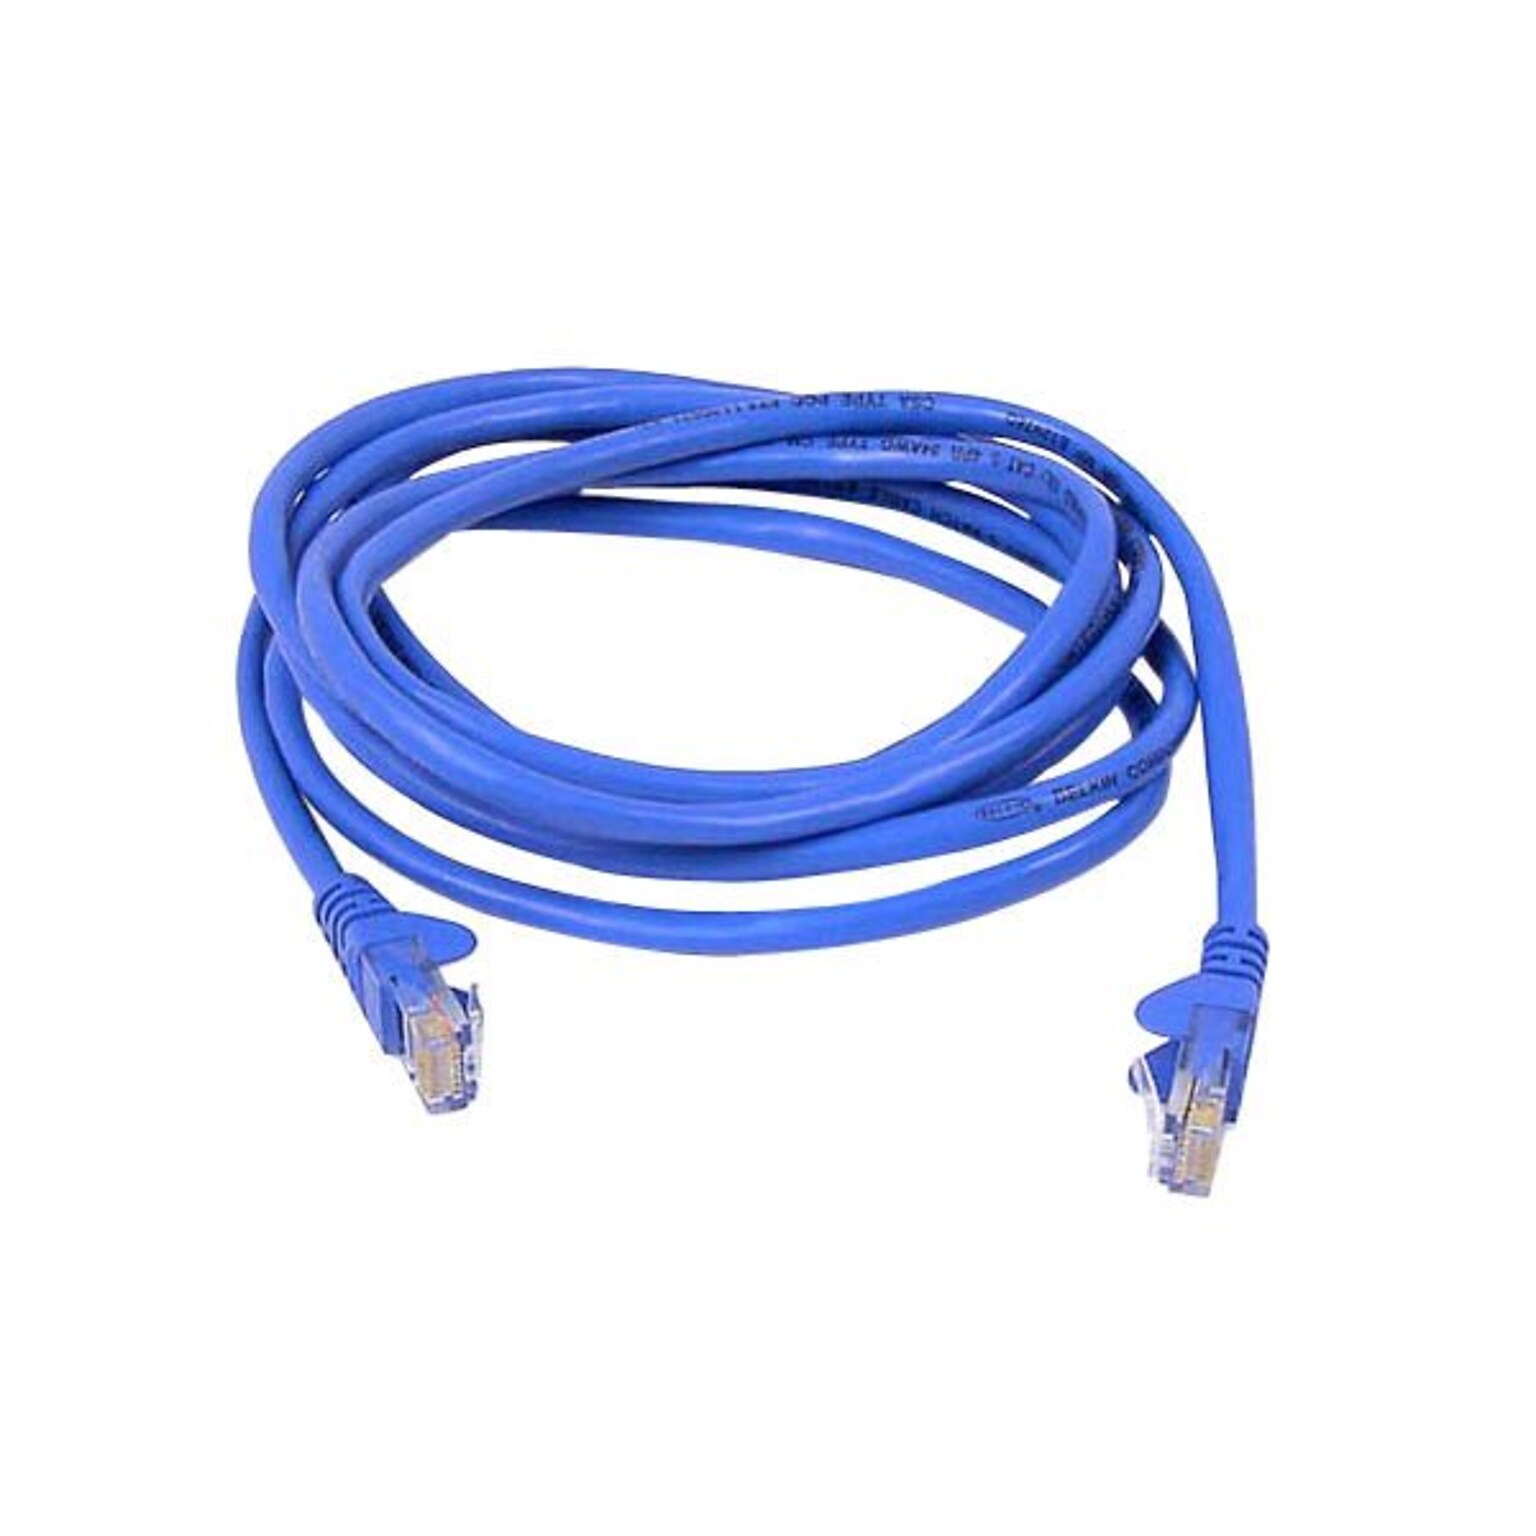 Belkin™ 15 Cat6 Male High-Performance Snagless Network Cable, Blue